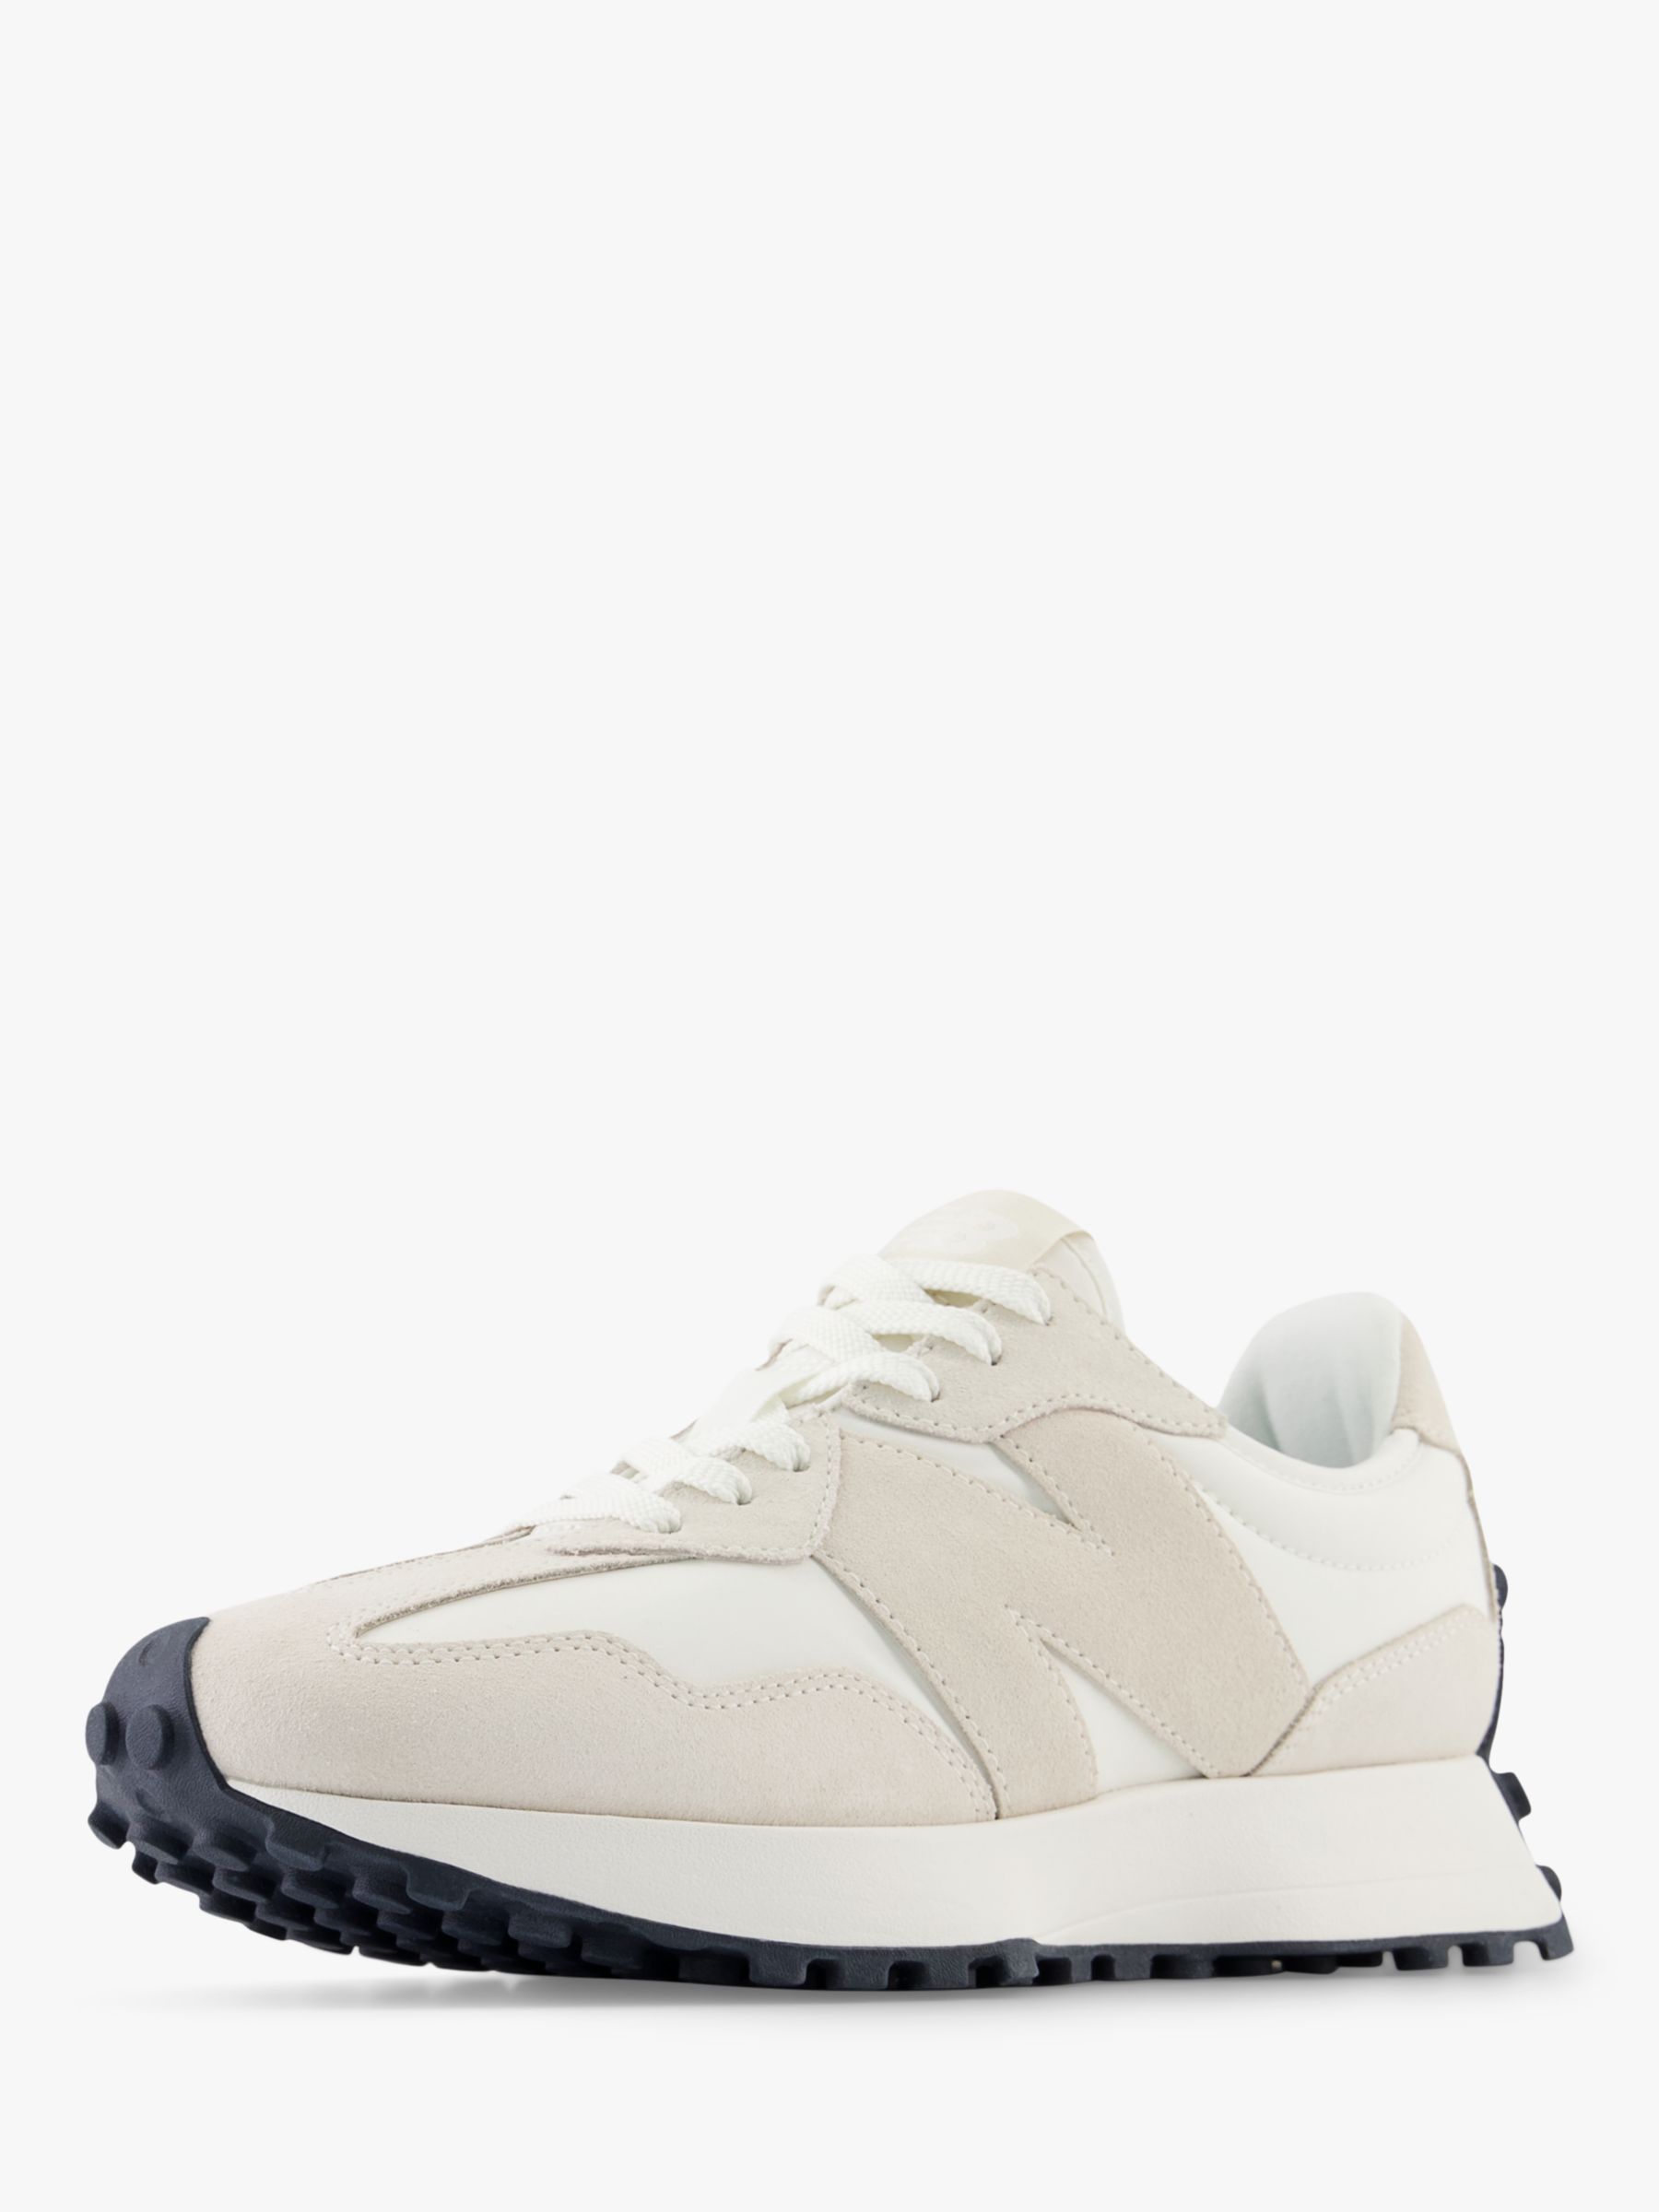 New Balance 327 Trainers, Linen at John Lewis & Partners